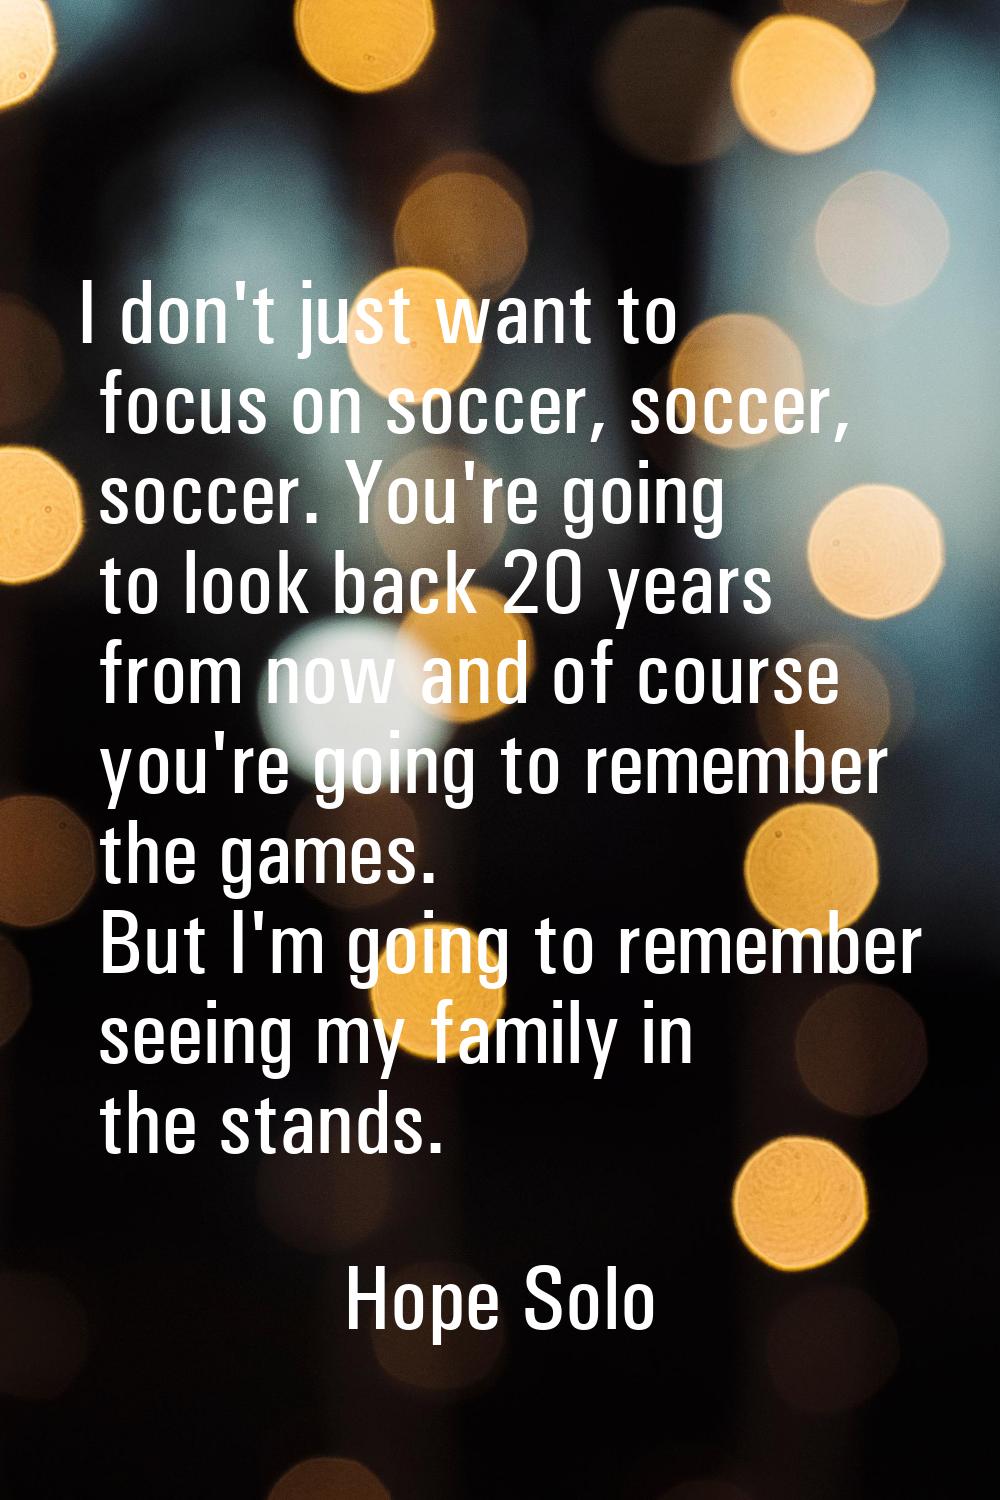 I don't just want to focus on soccer, soccer, soccer. You're going to look back 20 years from now a